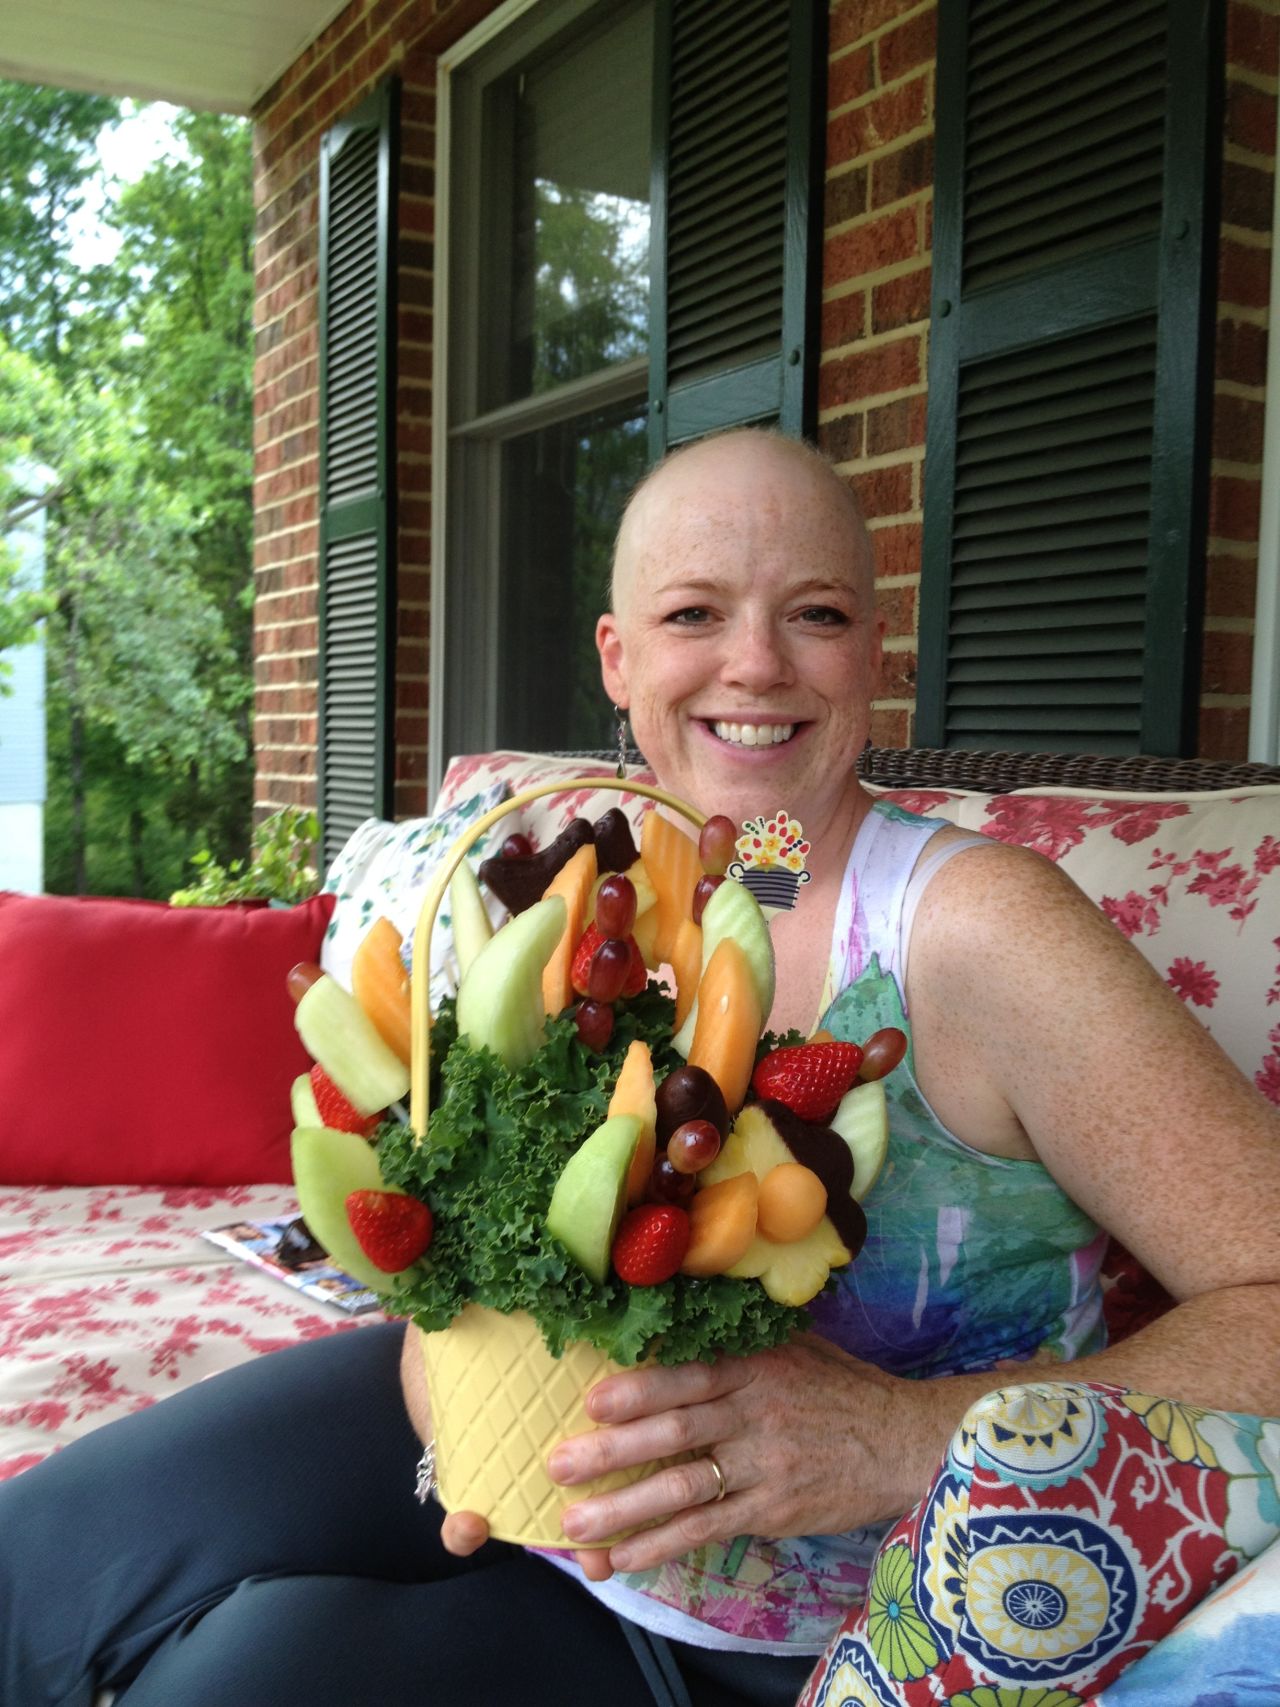 In December 2011, Schaaf was diagnosed with stage I leiomyosarcoma, a rare cancer found in muscle tissue. She underwent four rounds of chemotherapy in the spring of 2012. 